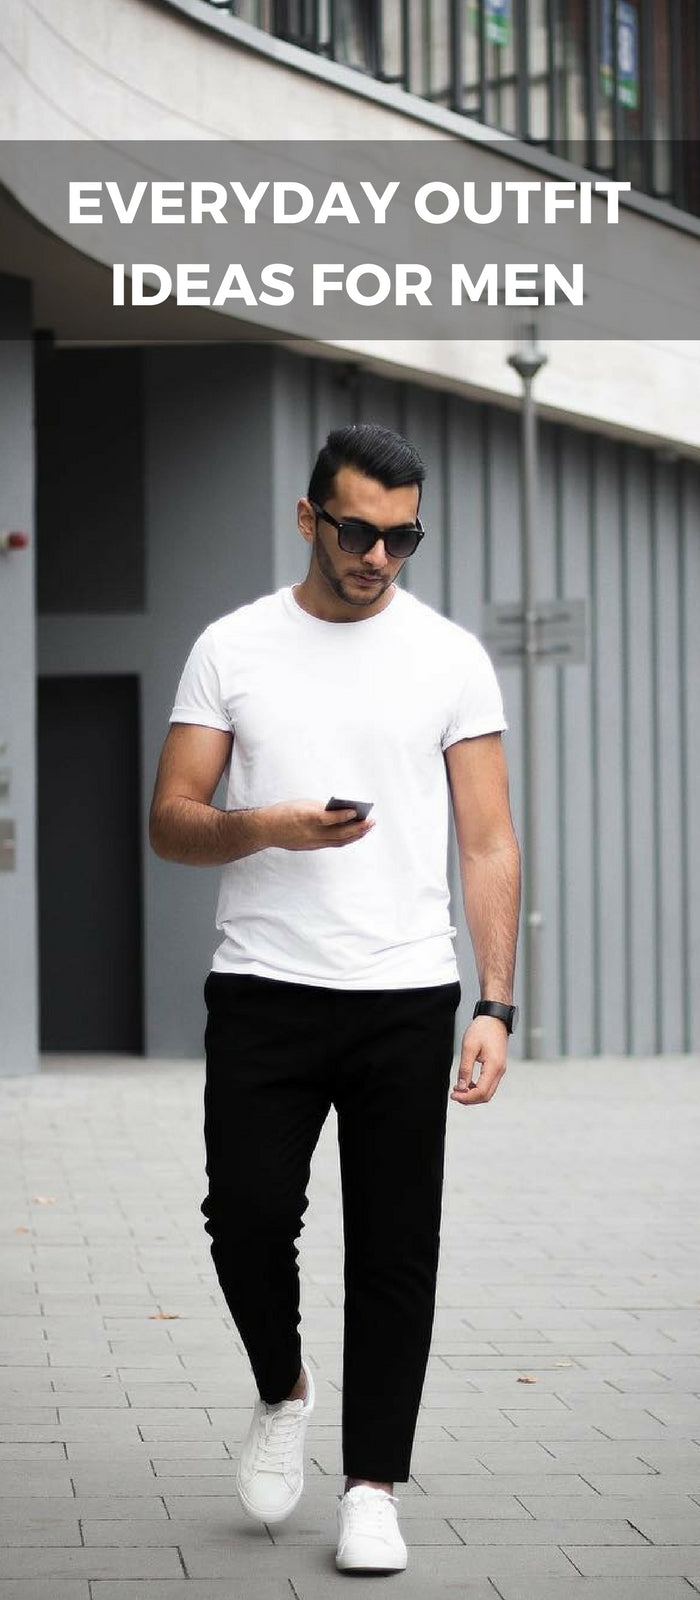 7 Simple Outfits For Guys – LIFESTYLE BY PS